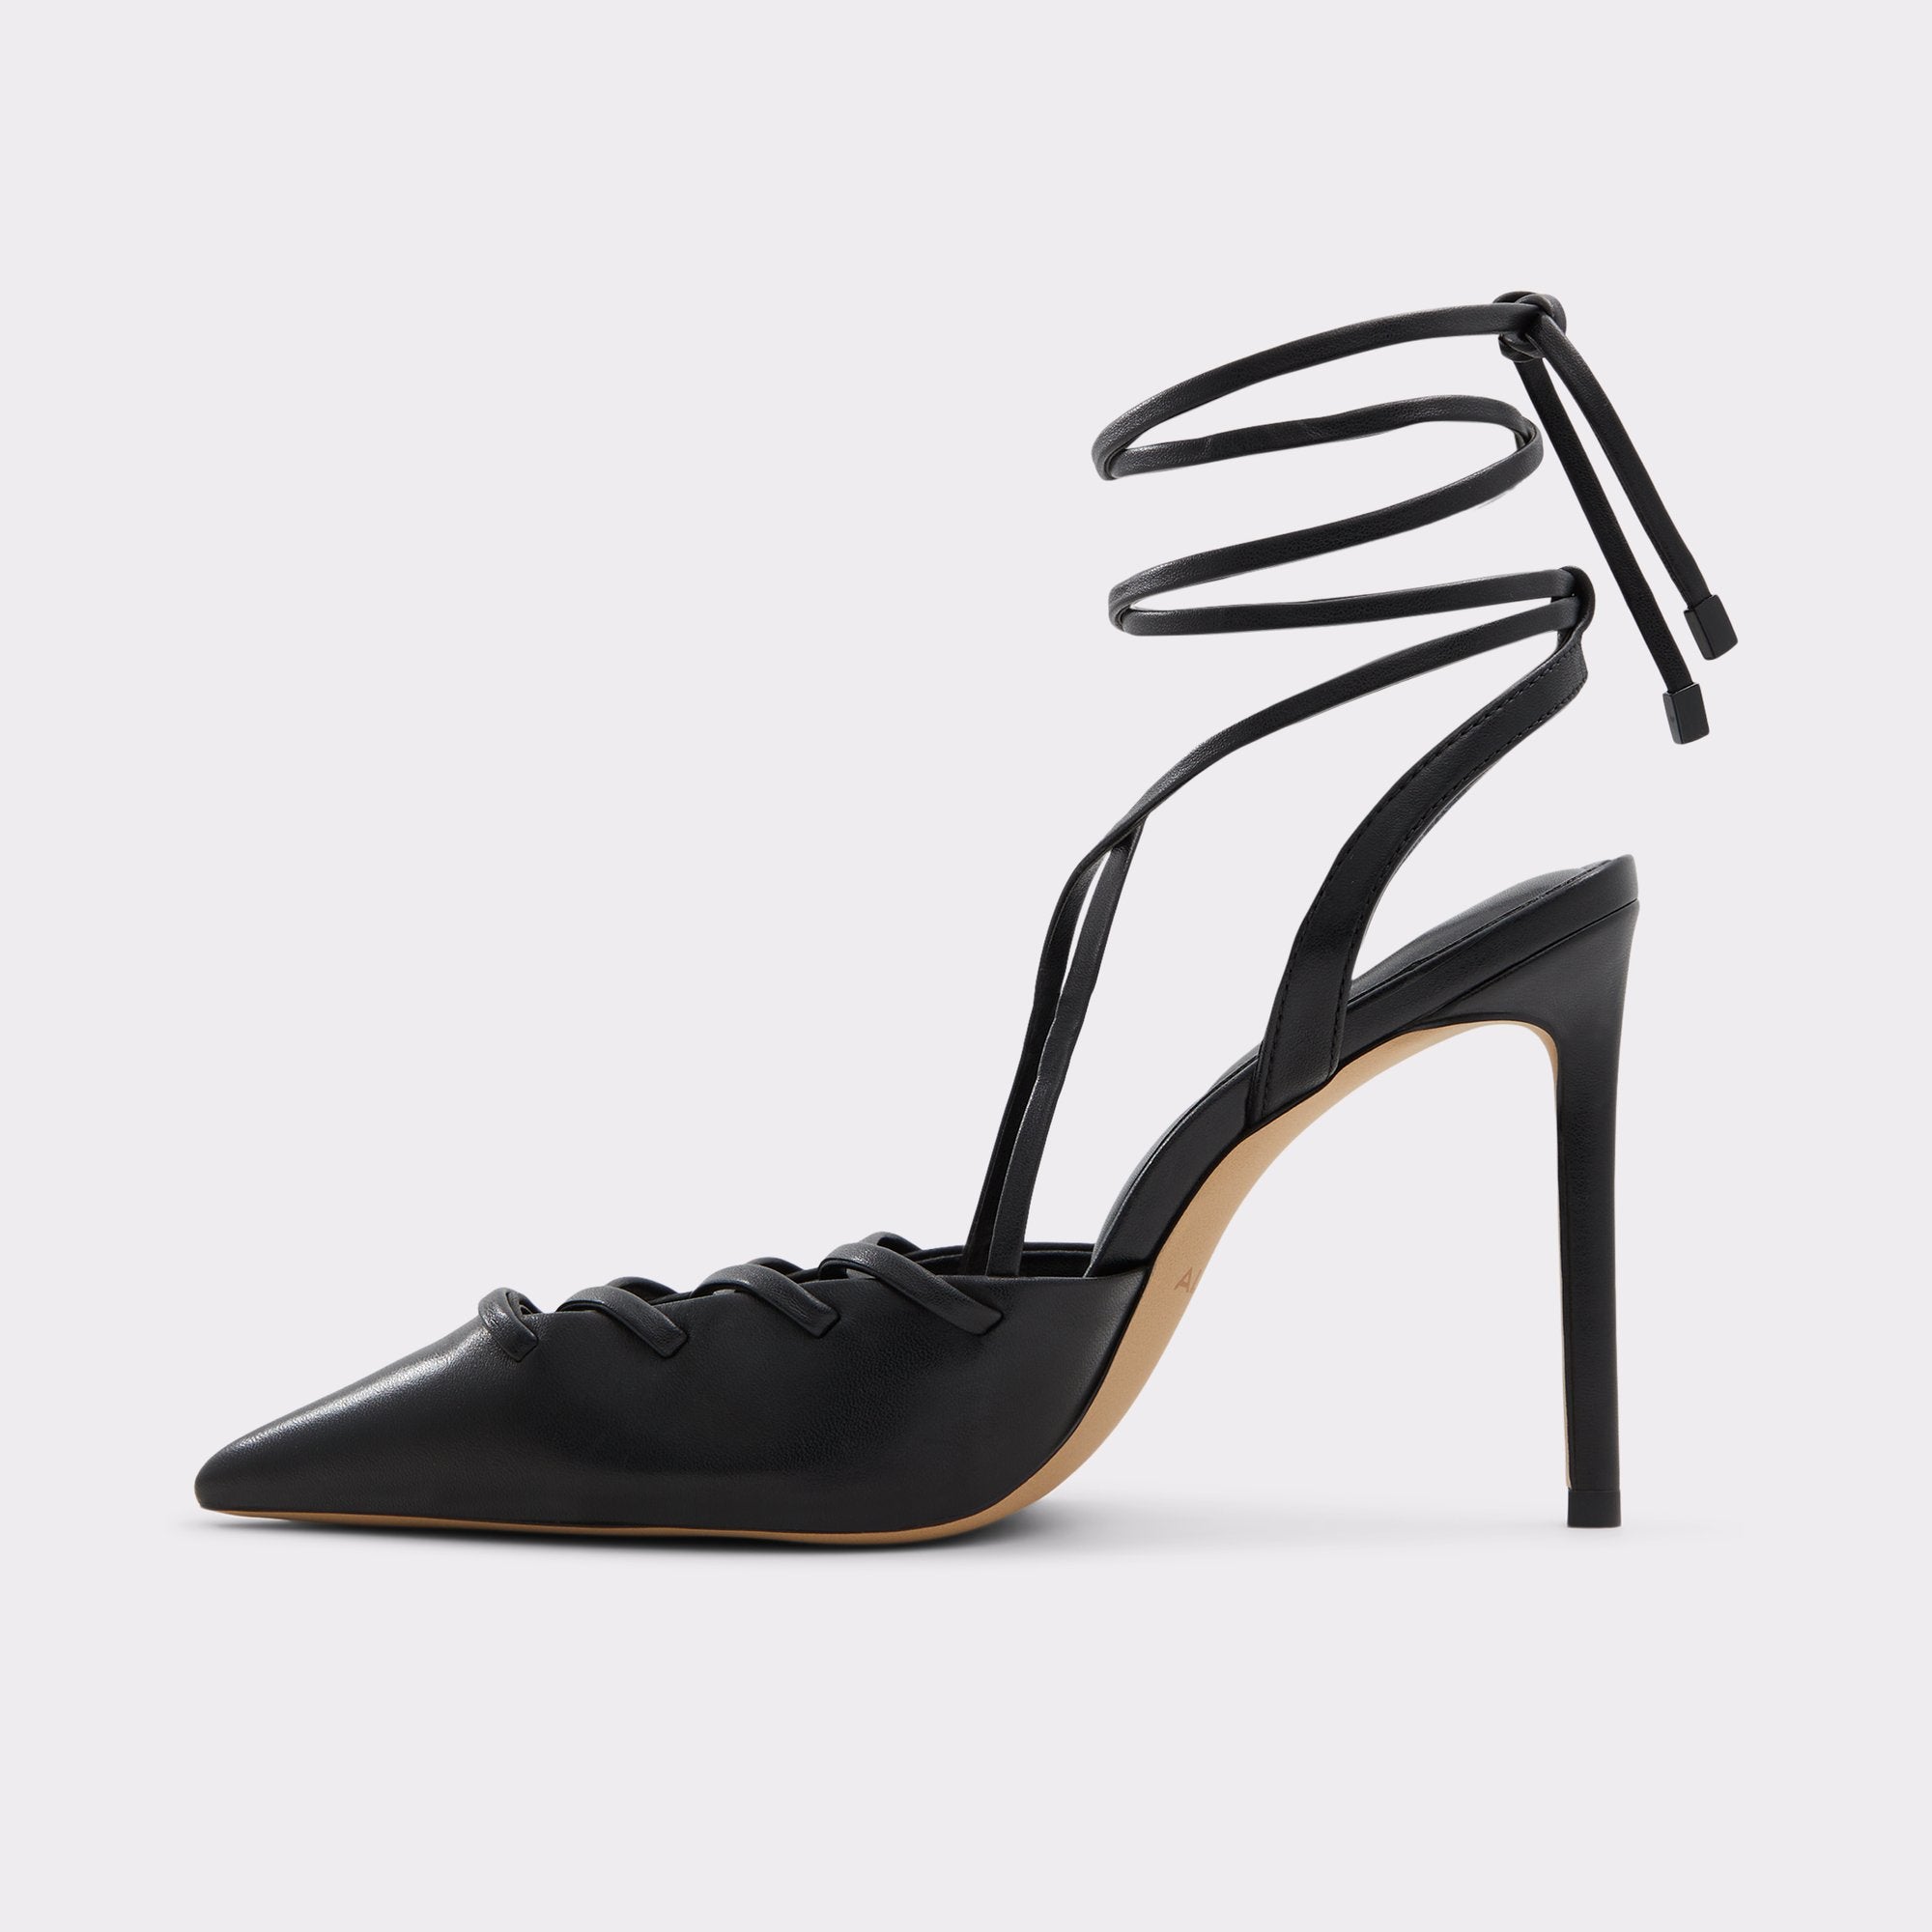 ALDO LACE-UP POINTED TOE ANKLE TIE PUMP IN BLACK